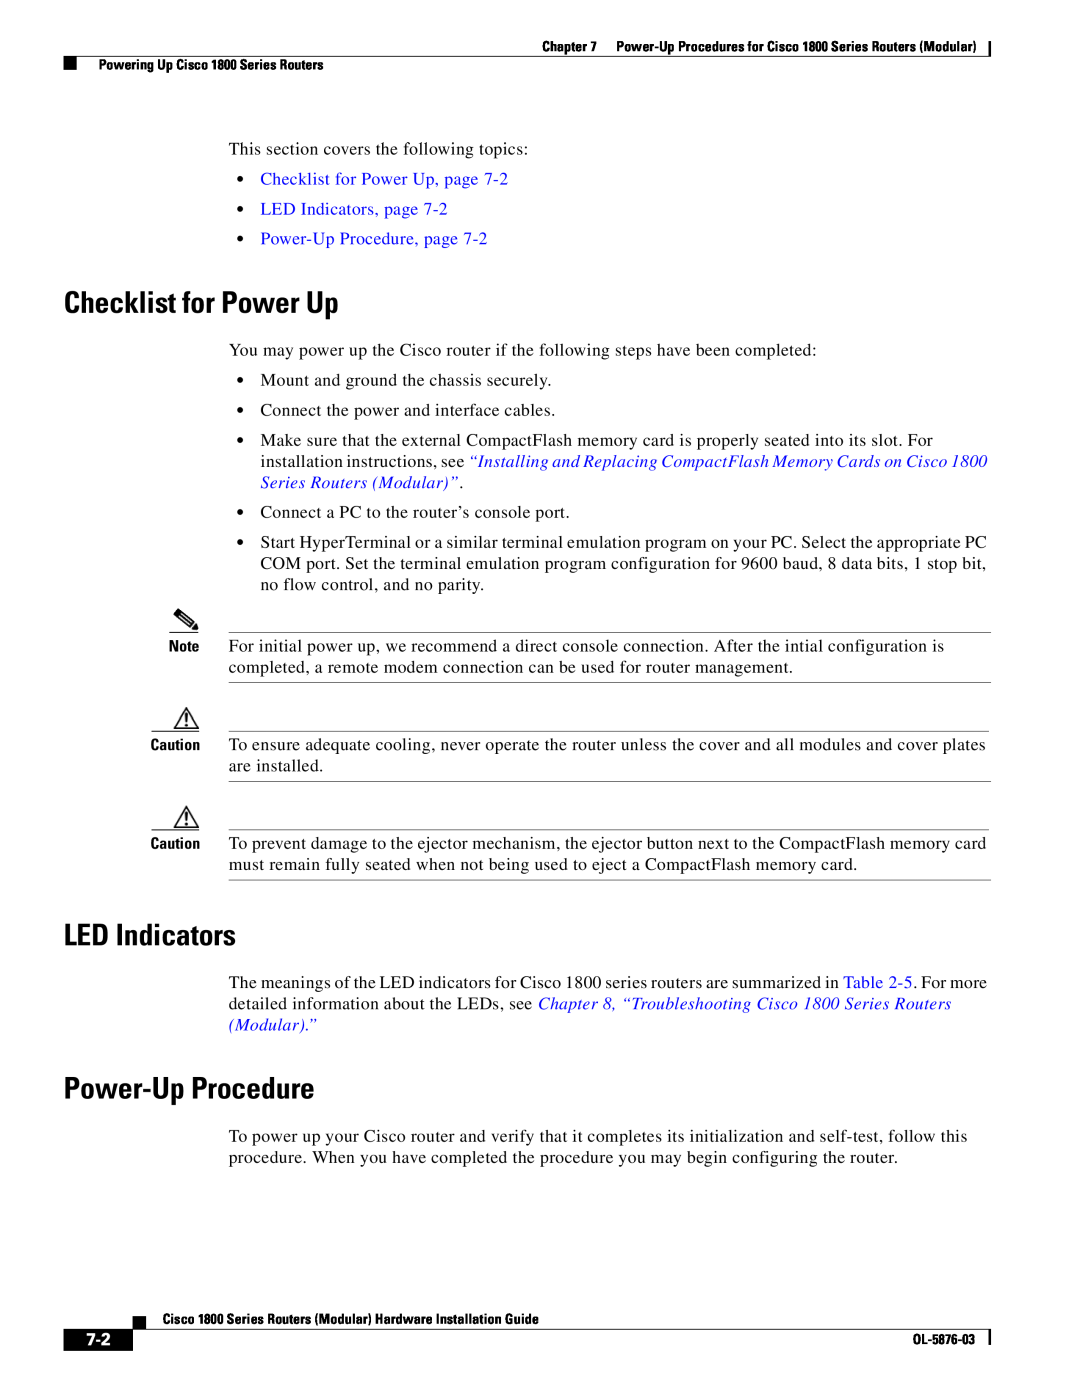 Cisco Systems CISCO1841-HSEC/K9-RF manual Checklist for Power Up, Power-Up Procedure, page, LED Indicators 